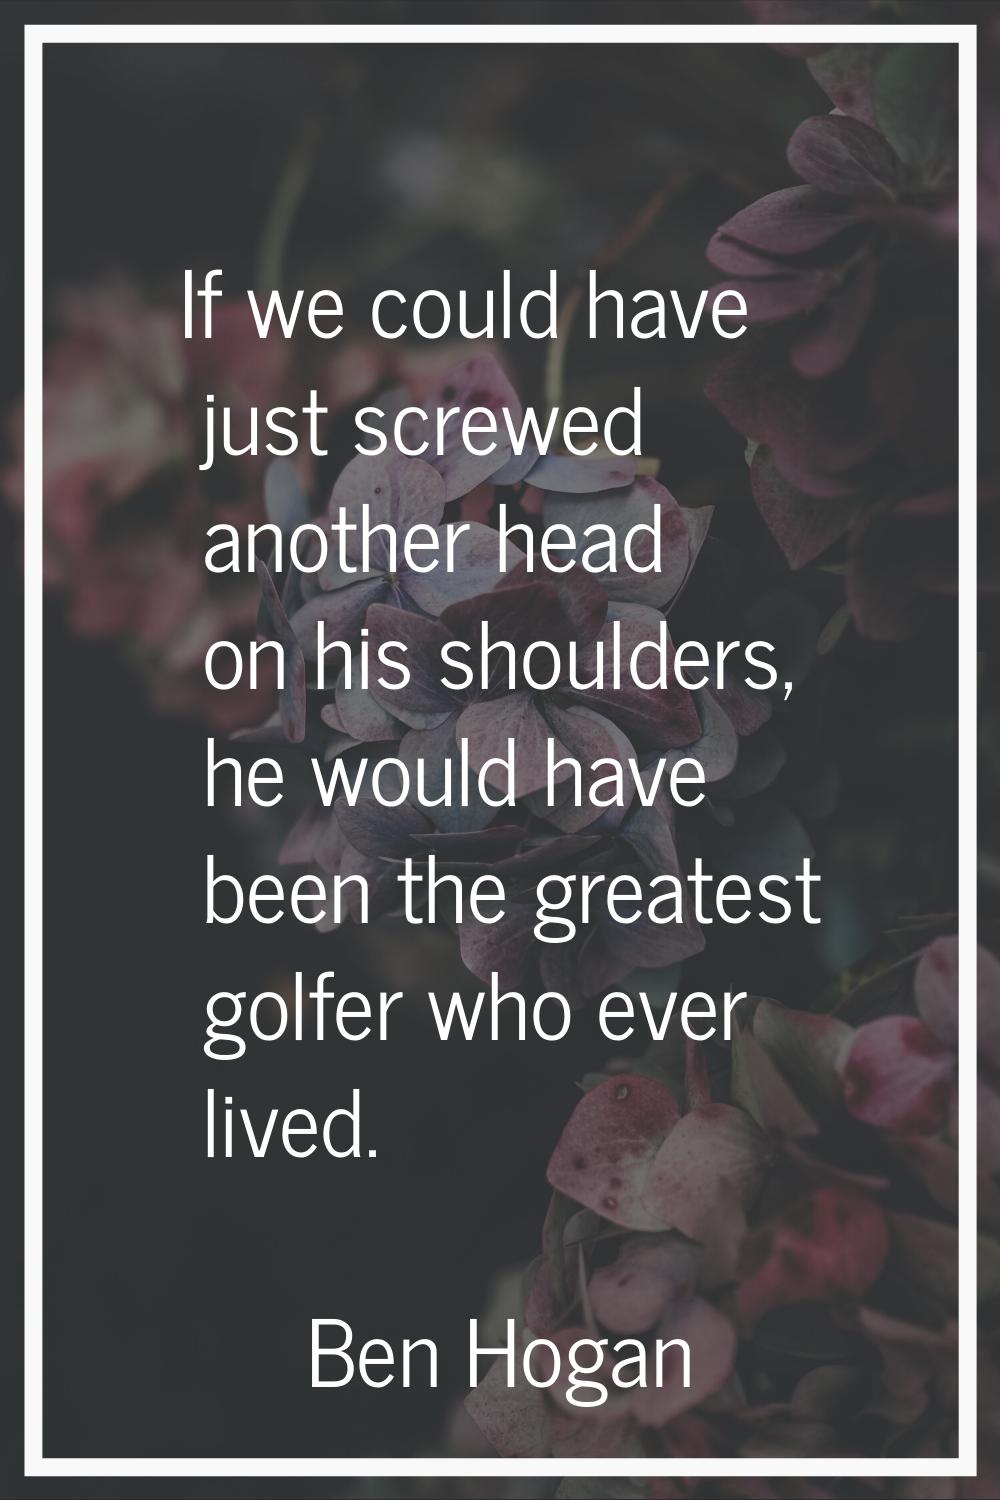 If we could have just screwed another head on his shoulders, he would have been the greatest golfer